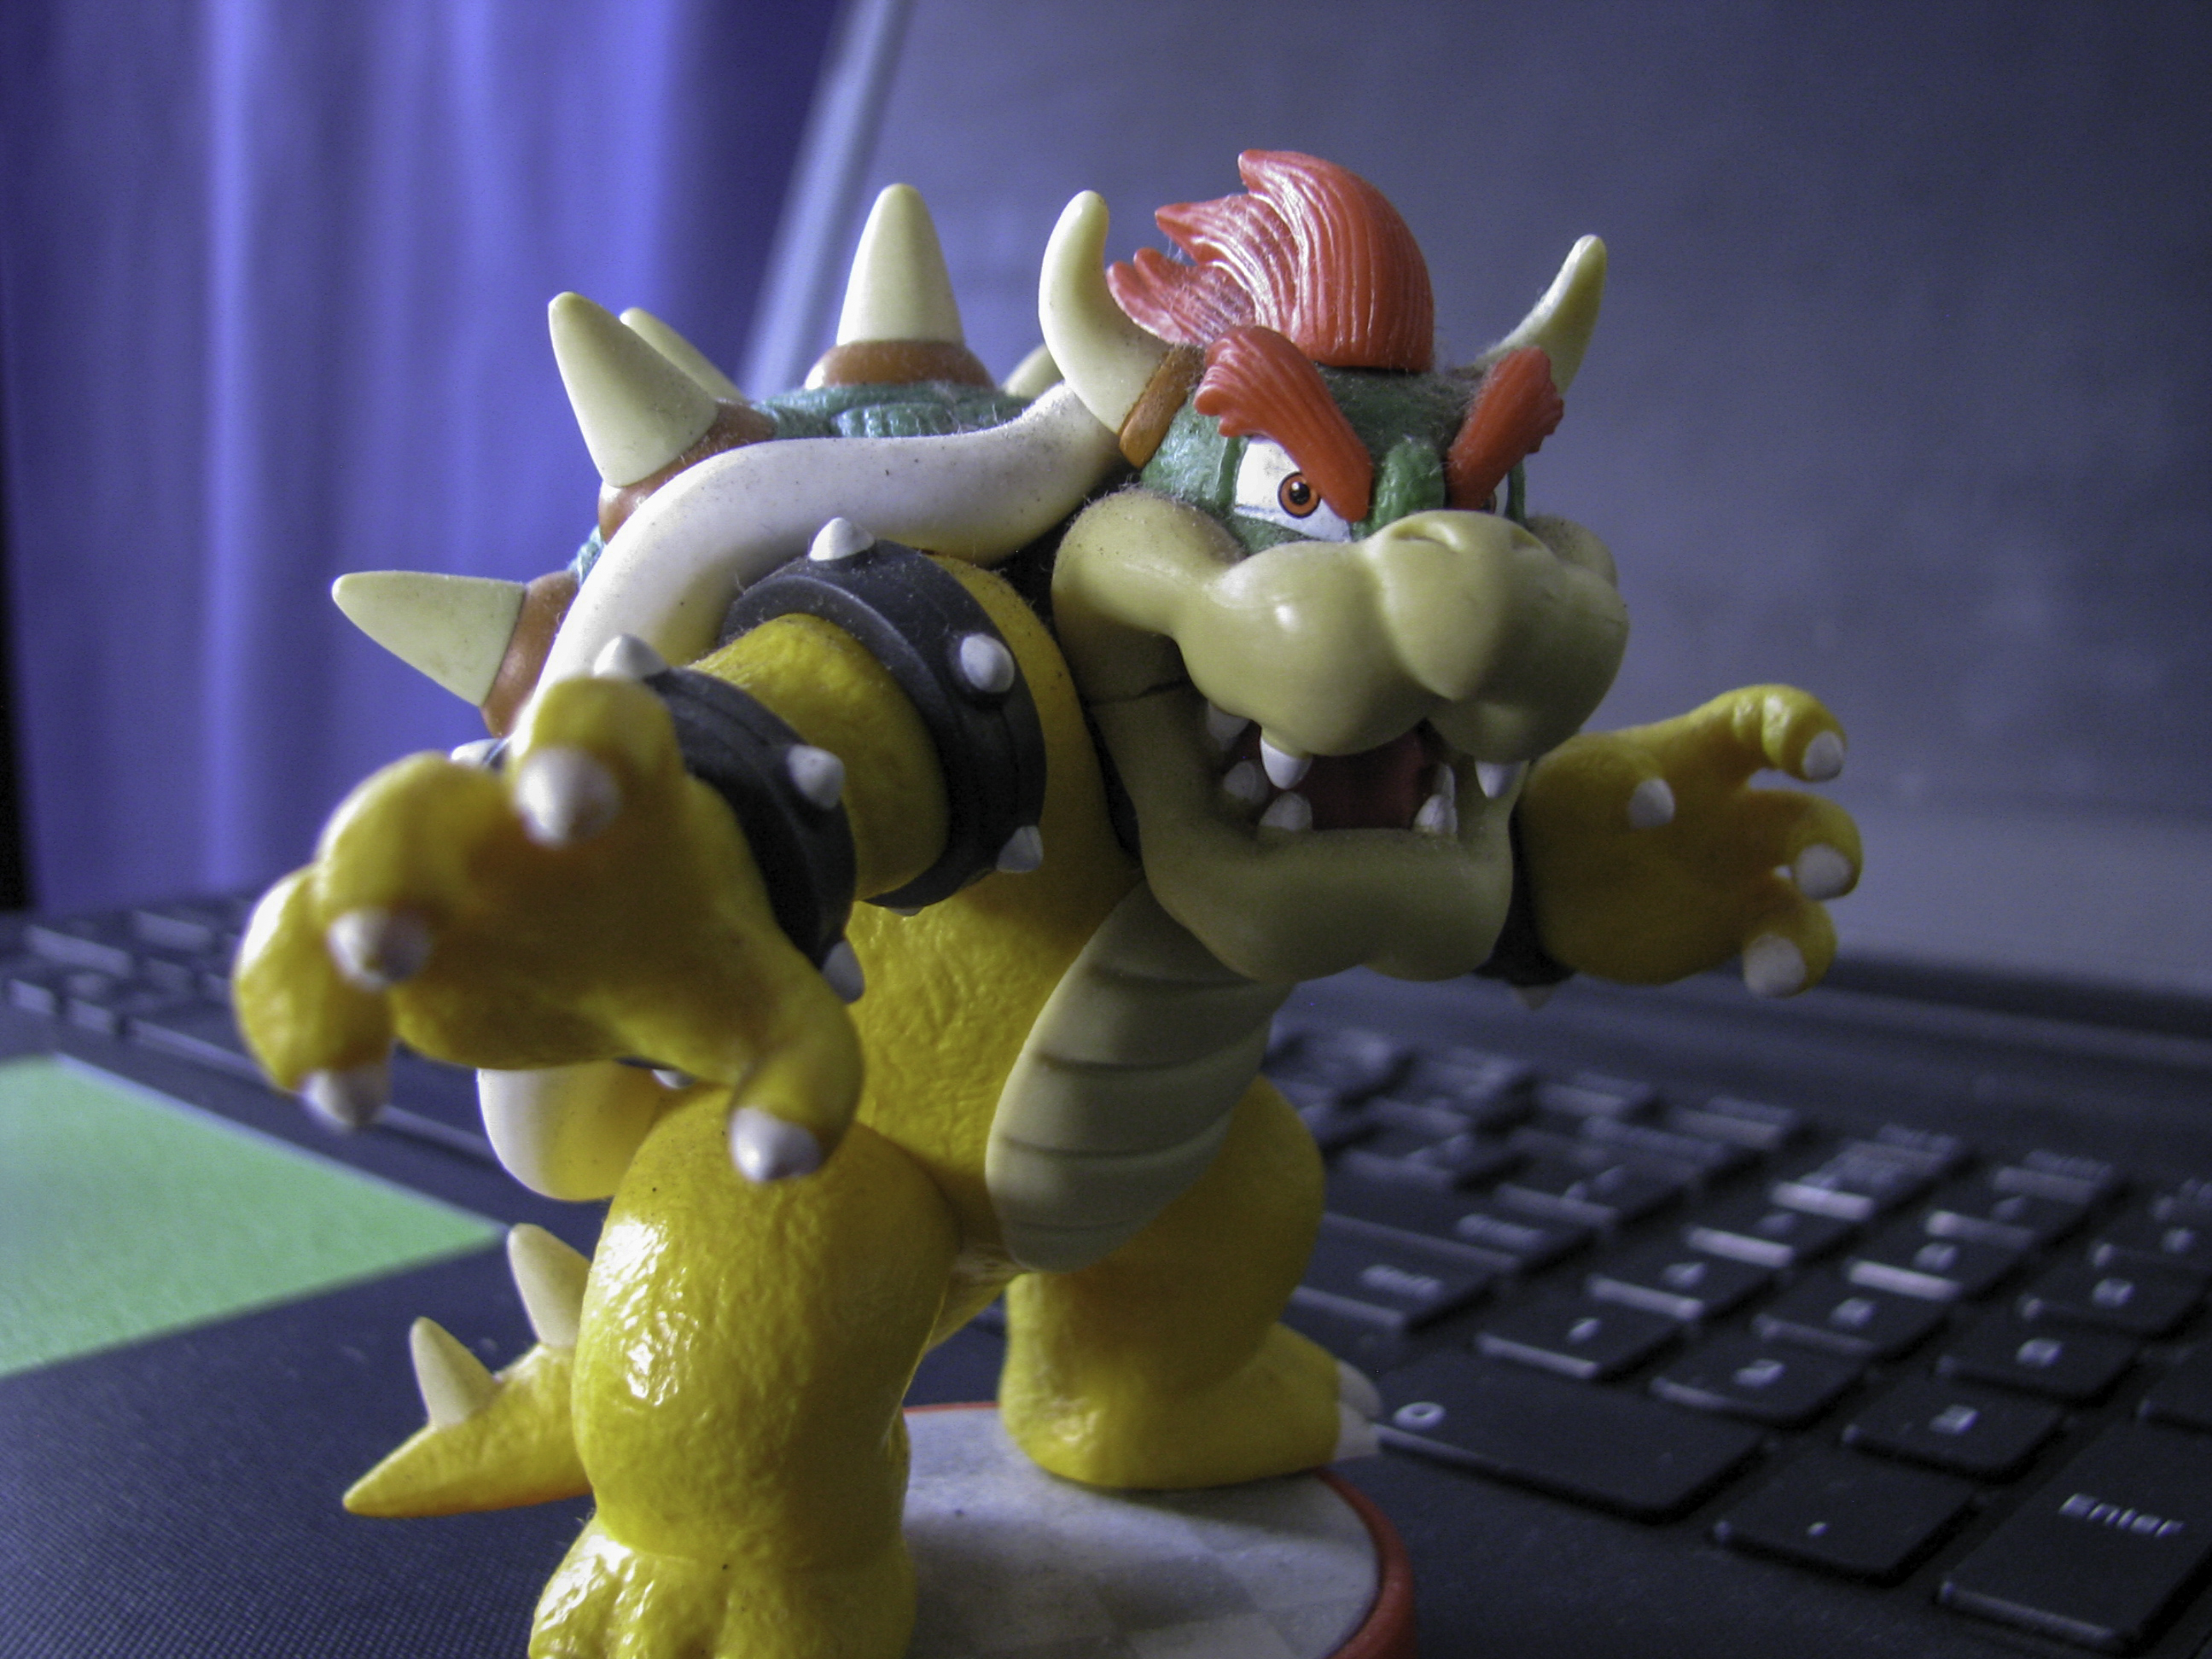 General 2592x1944 toys Nintendo Bowser keyboards laptop macro Super Mario video game characters figurines video games villains closeup